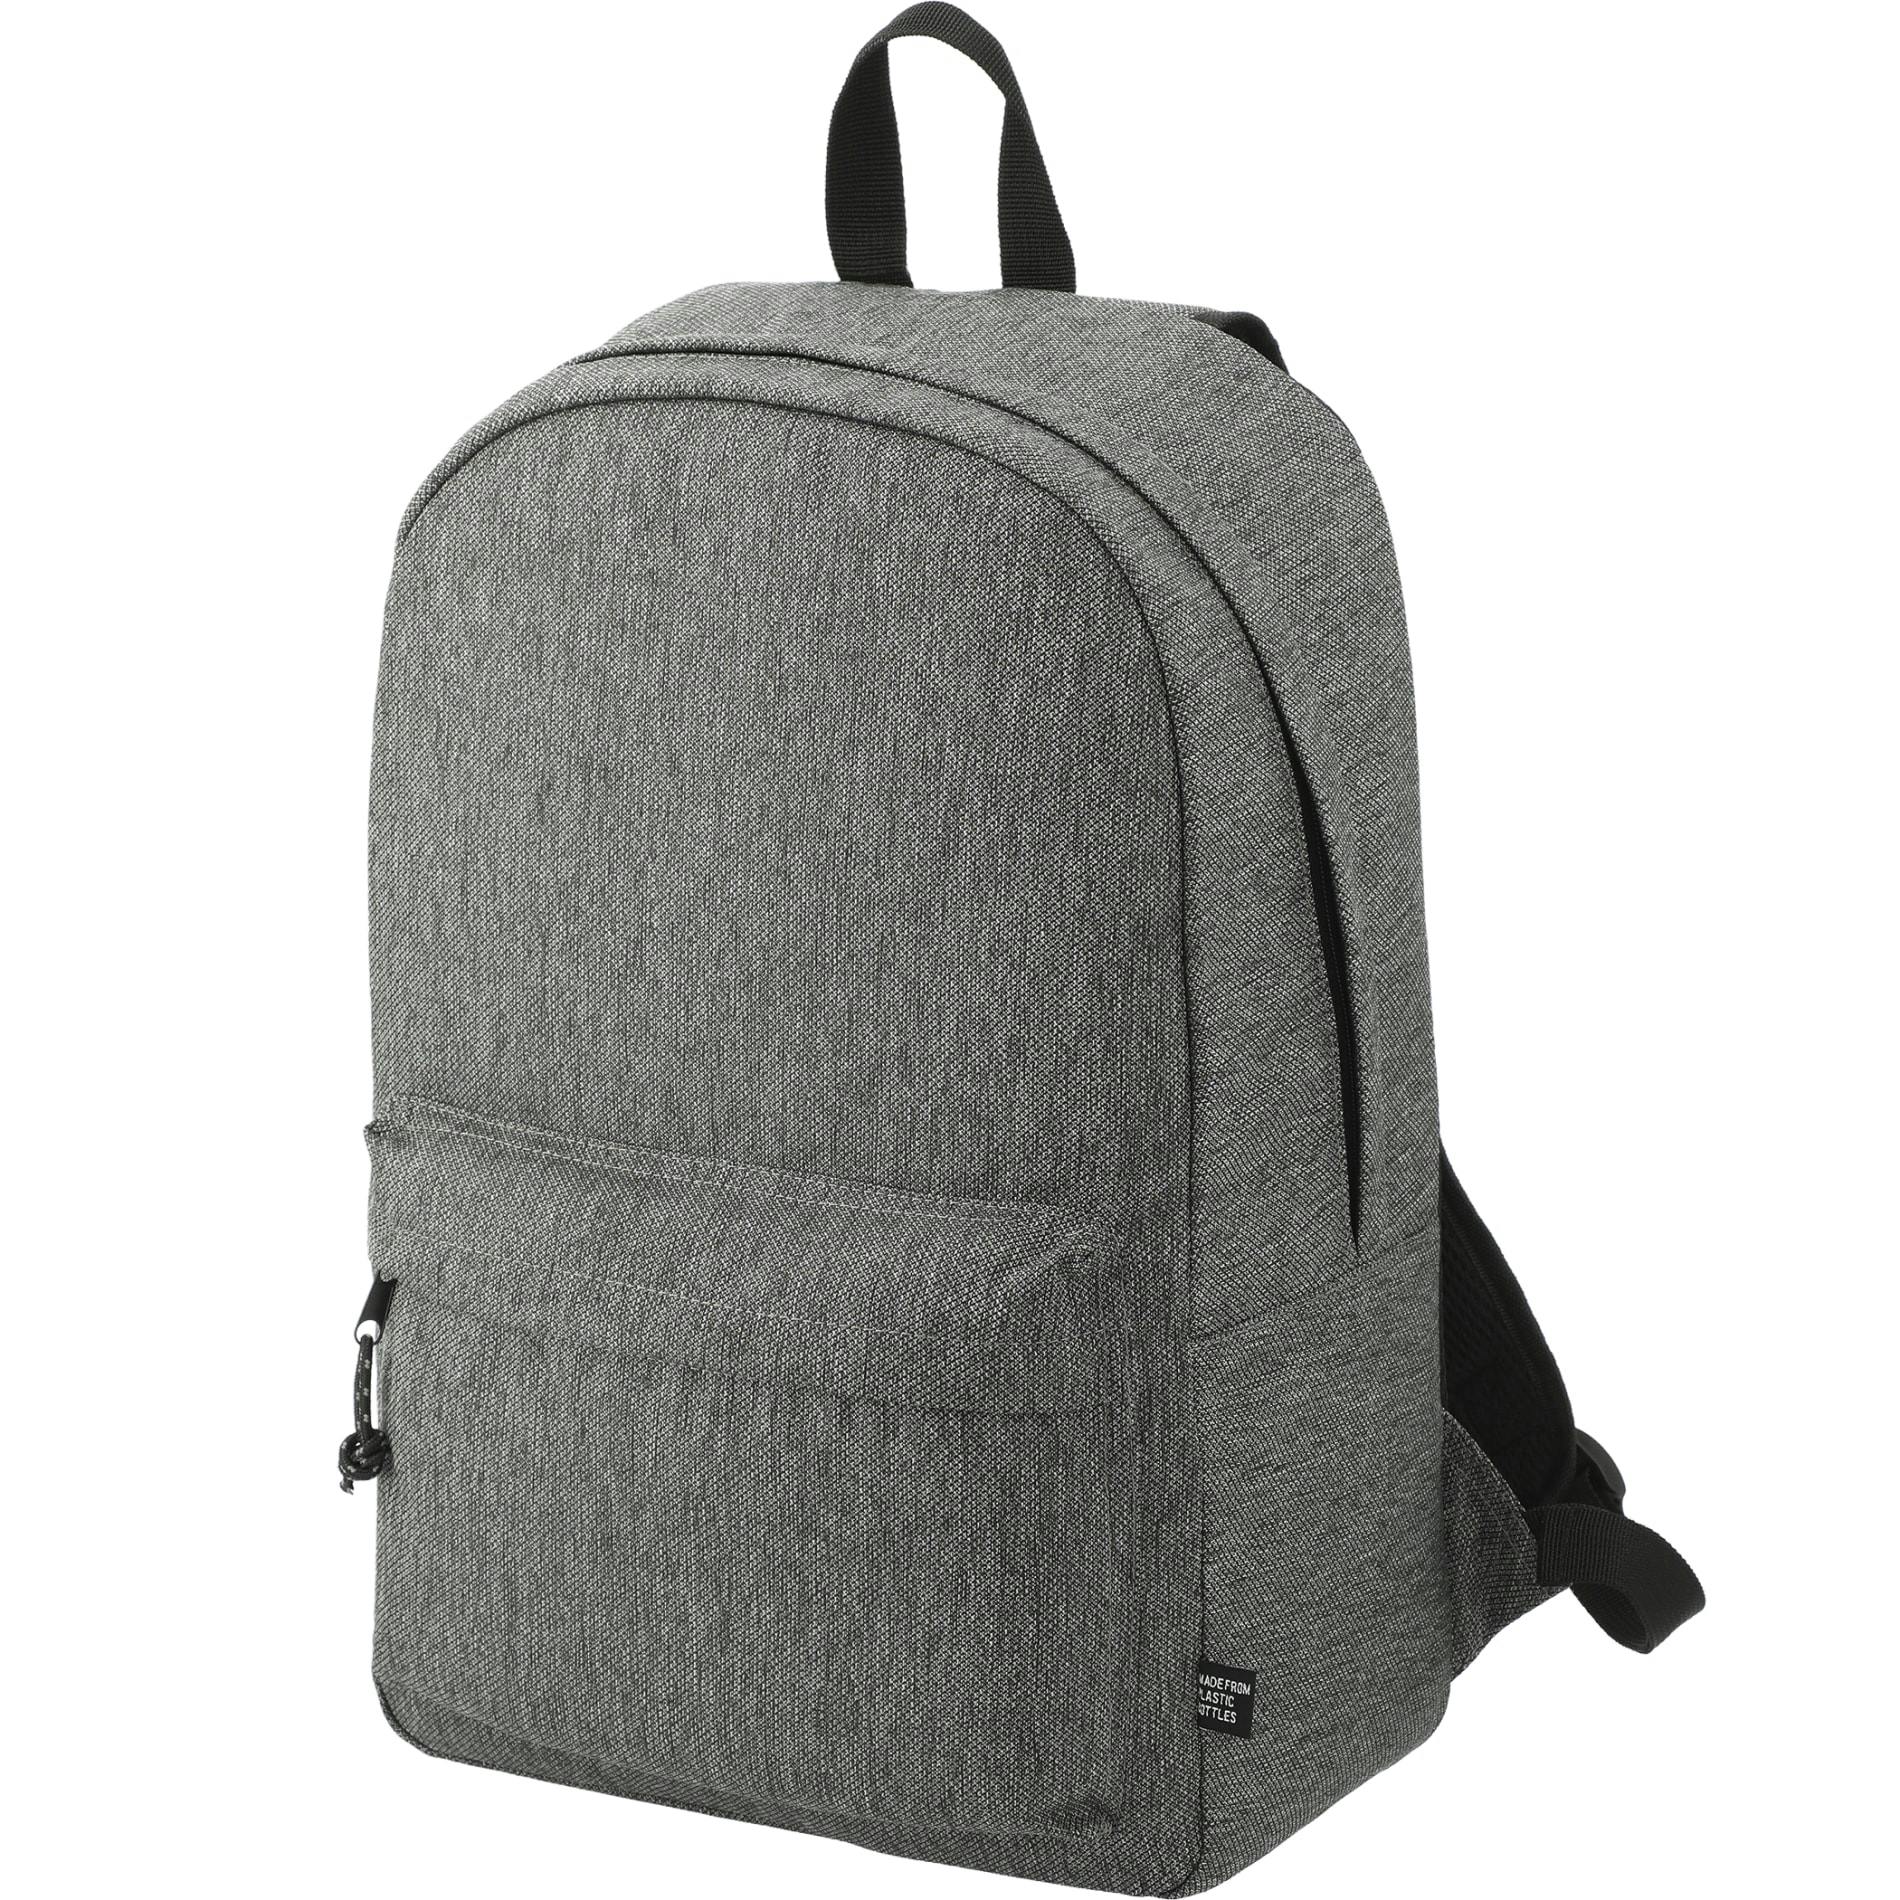 Vila Recycled 15" Computer Backpack - additional Image 6